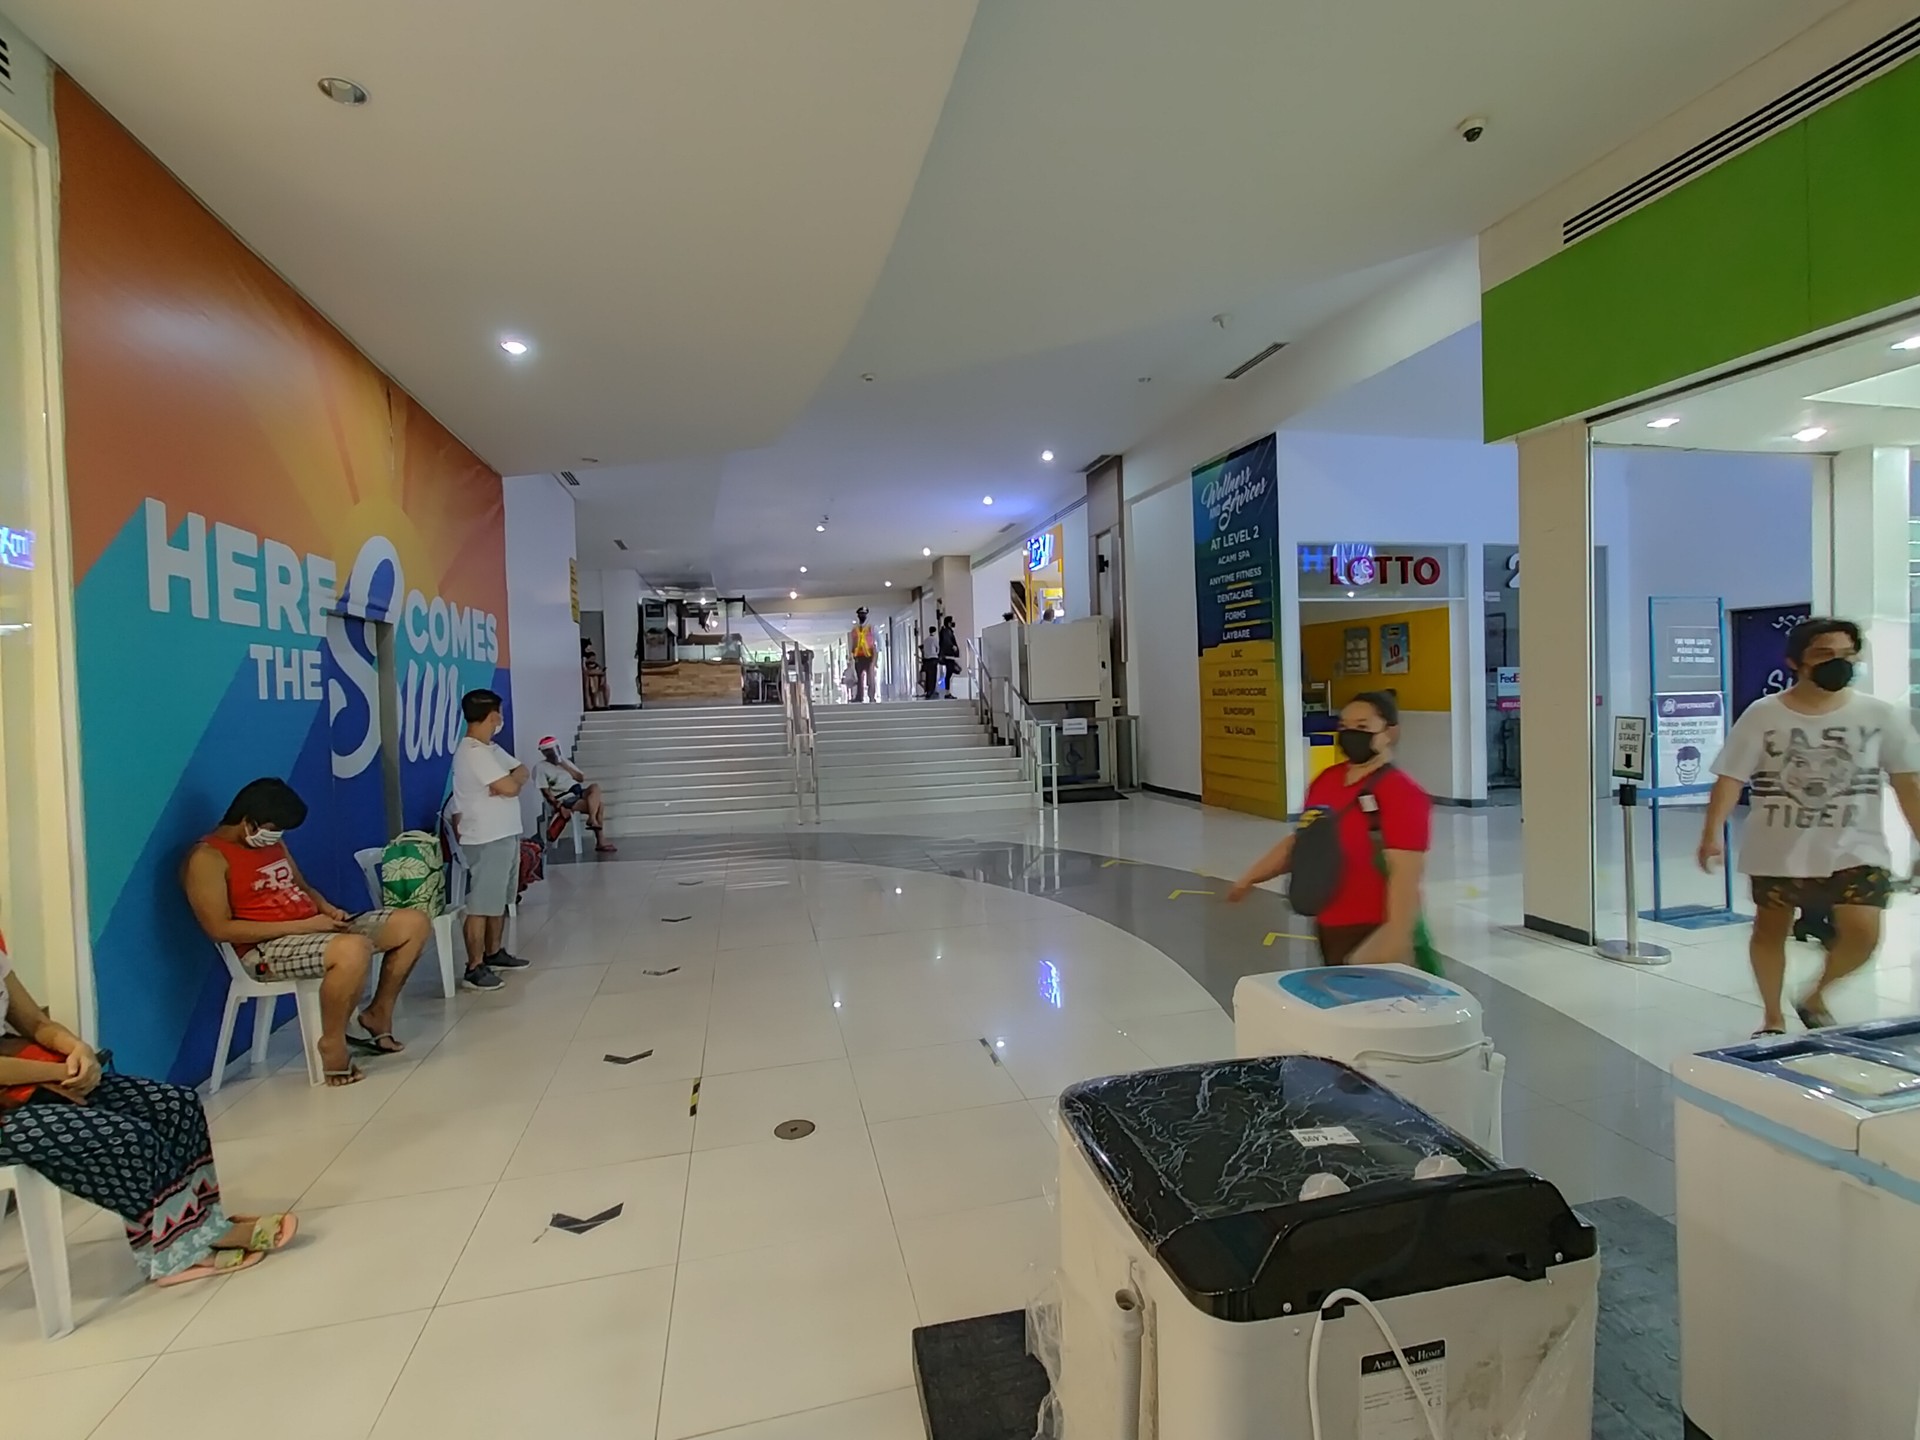 photo of a hallway inside a mall using the Oppo A92